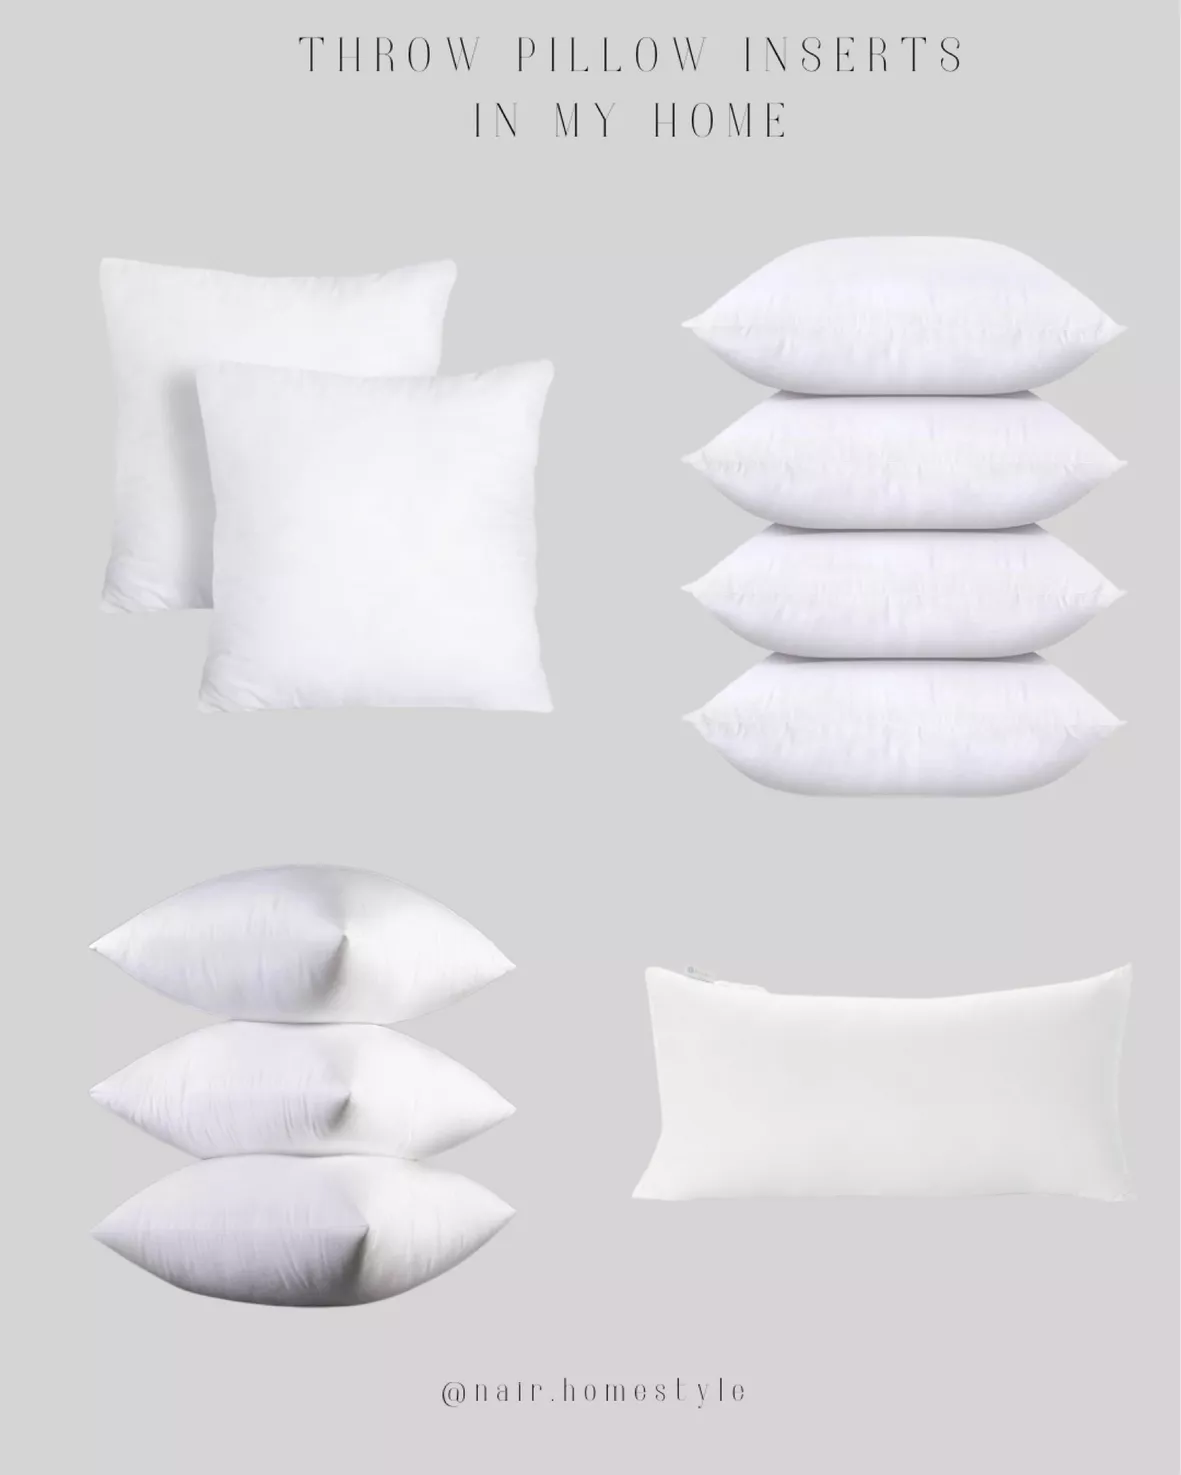  Utopia Bedding Throw Pillows Insert (Pack of 2, White) - 18 x  18 Inches Bed and Couch Pillows - Indoor Decorative Pillows : Home & Kitchen